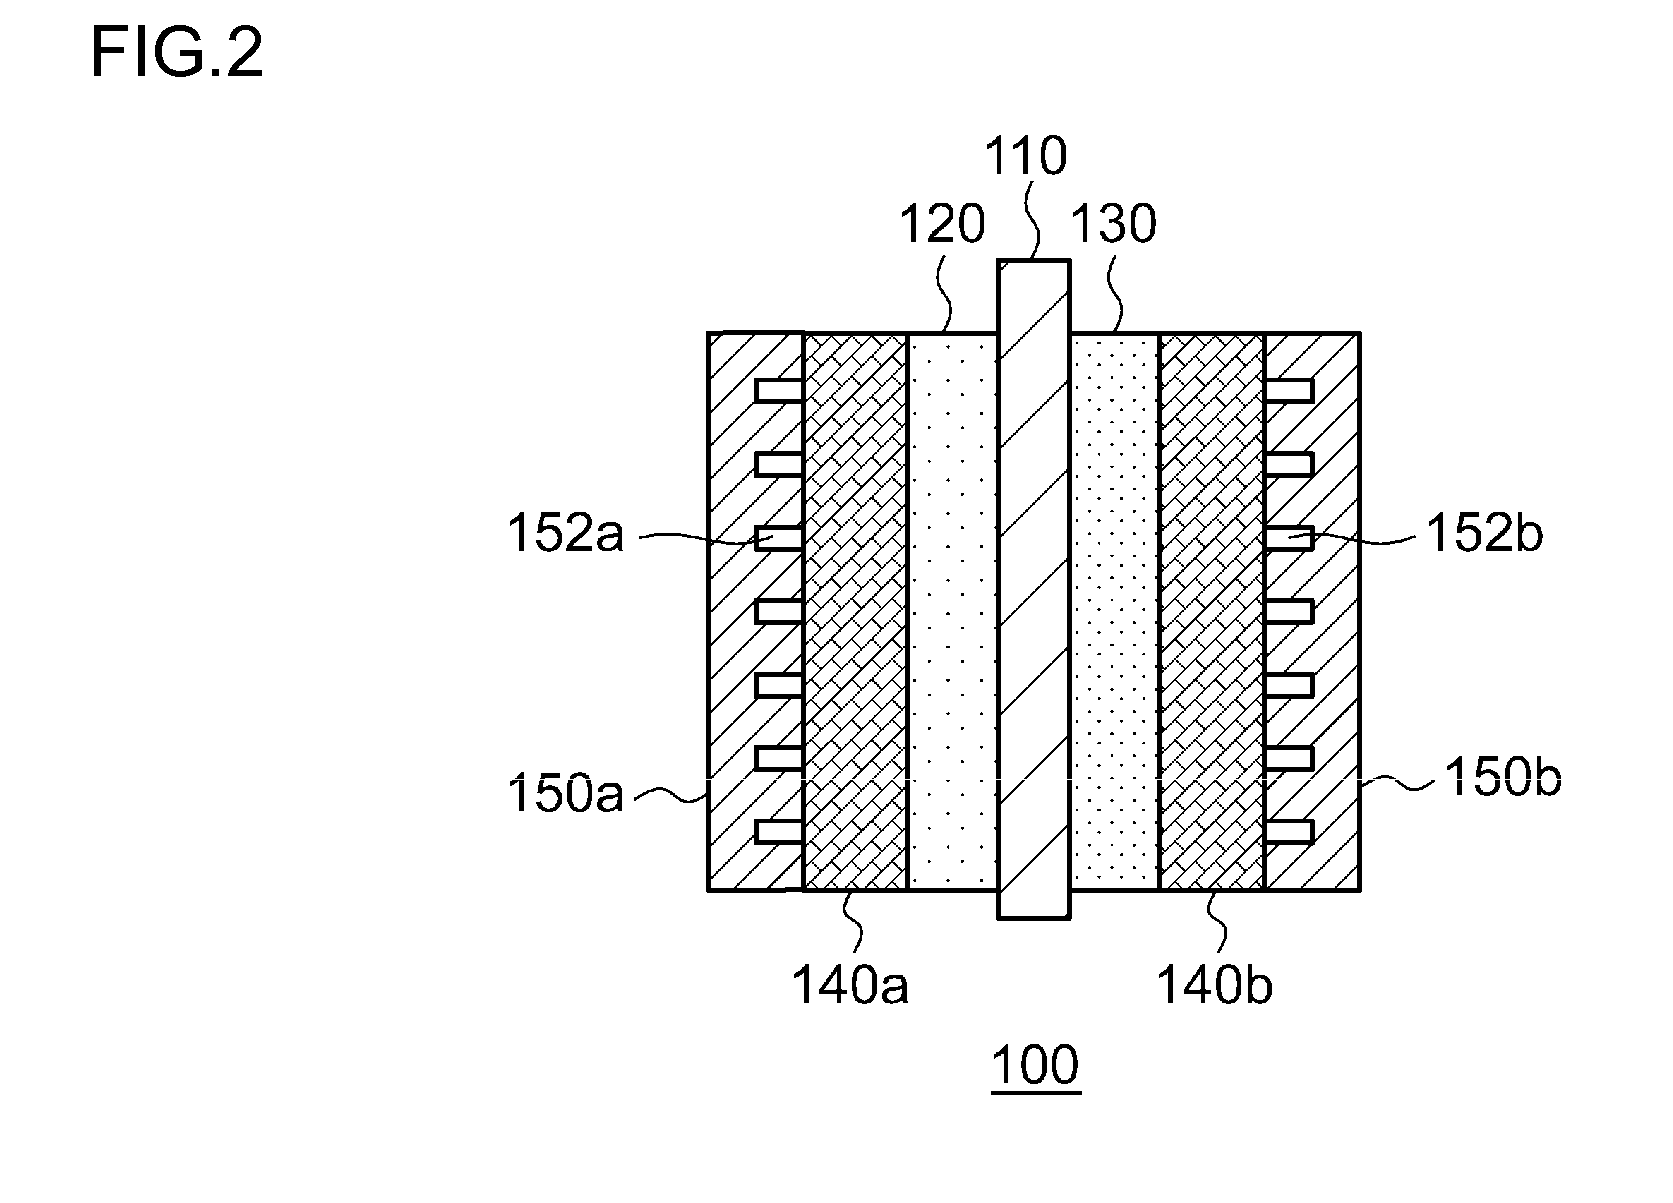 Electrochemical reduction device and method for manufacturing hydride of aromatic hydrocarbon compound or n-containing heterocyclic aromatic compound